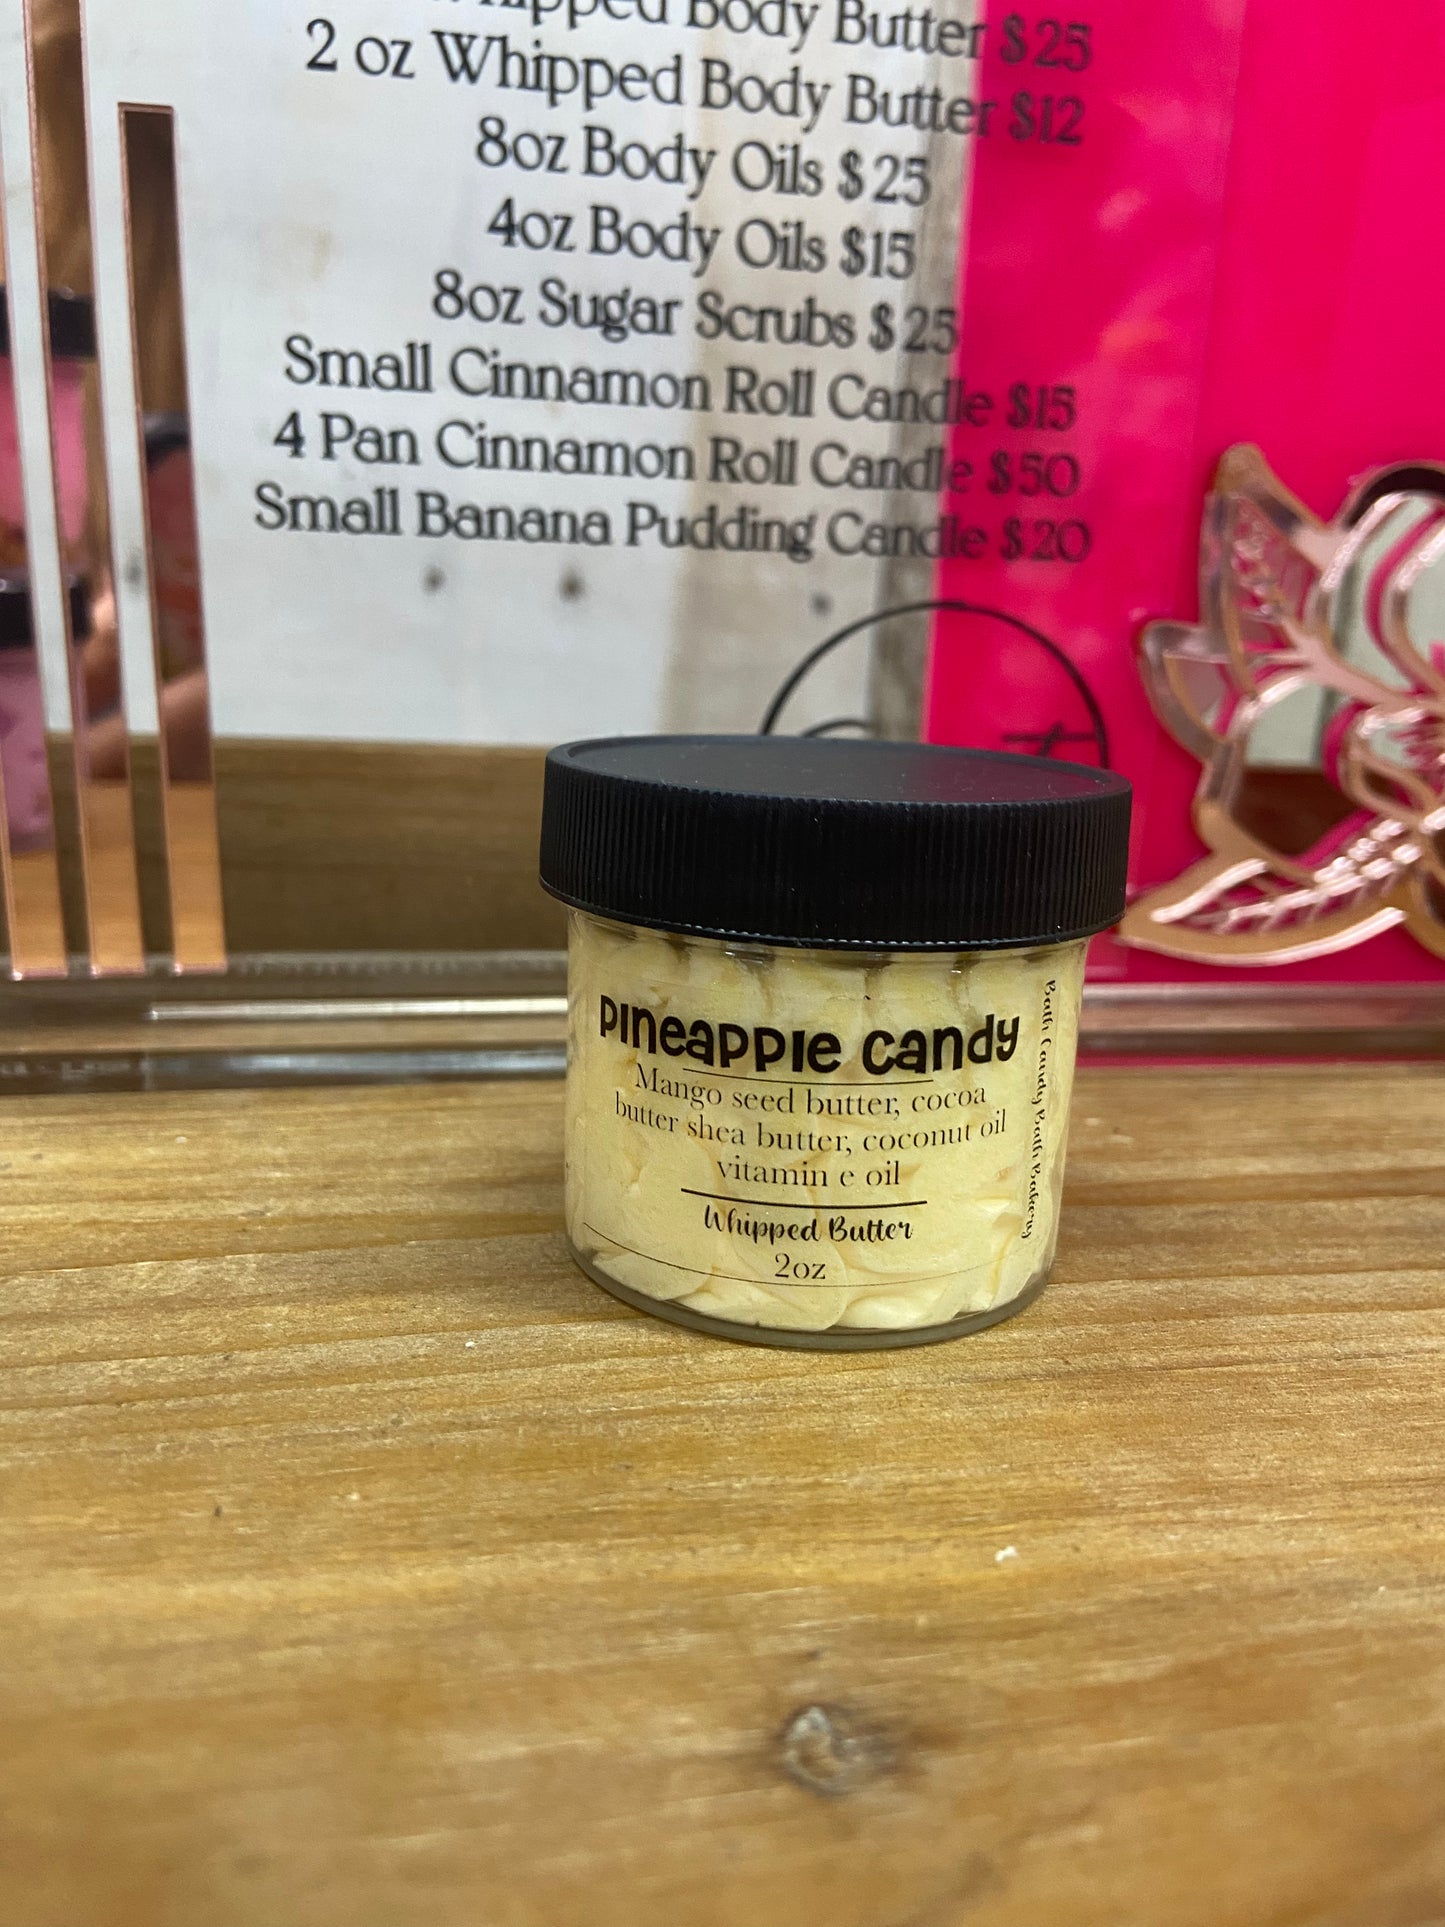 “Pineapple Candy” Whipped Body Butter